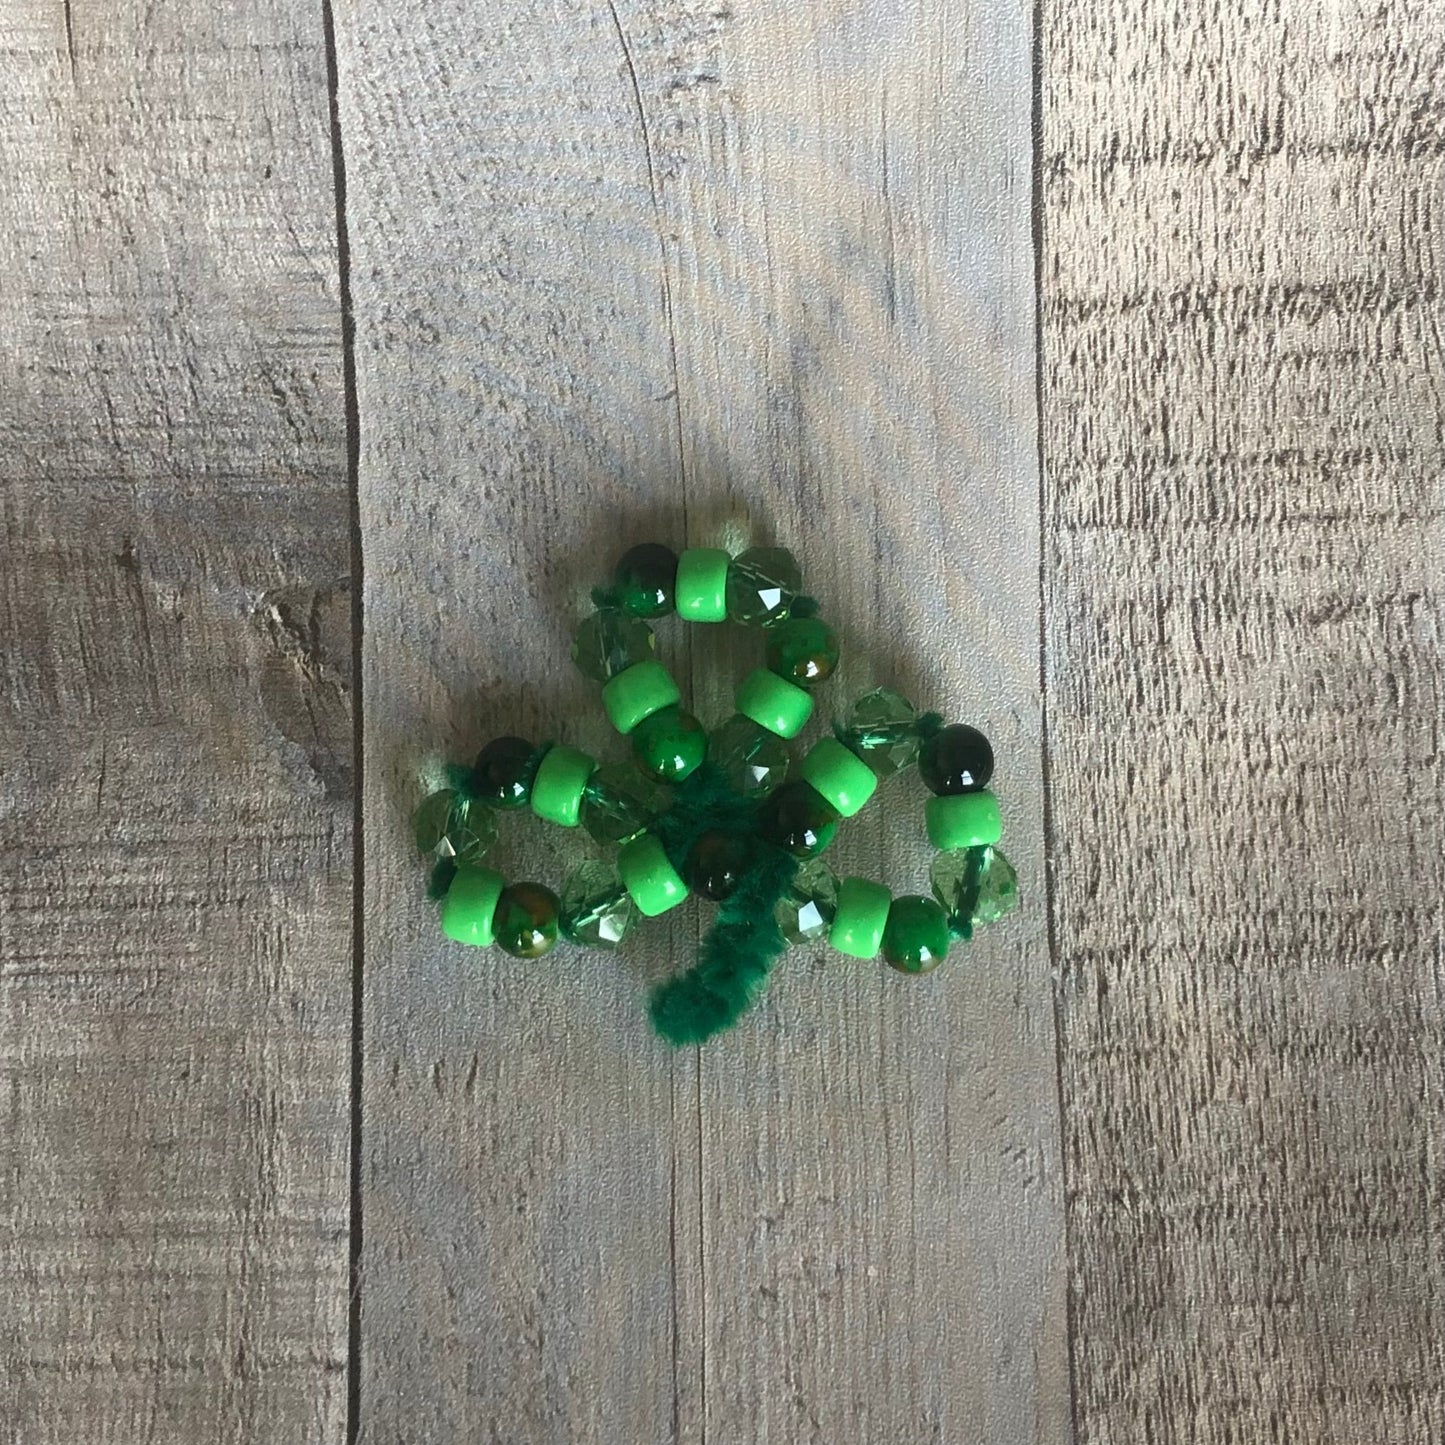 a beaded St. Patrick's Day shamrock pin. The craft kit is available on seniorlycreations.com.